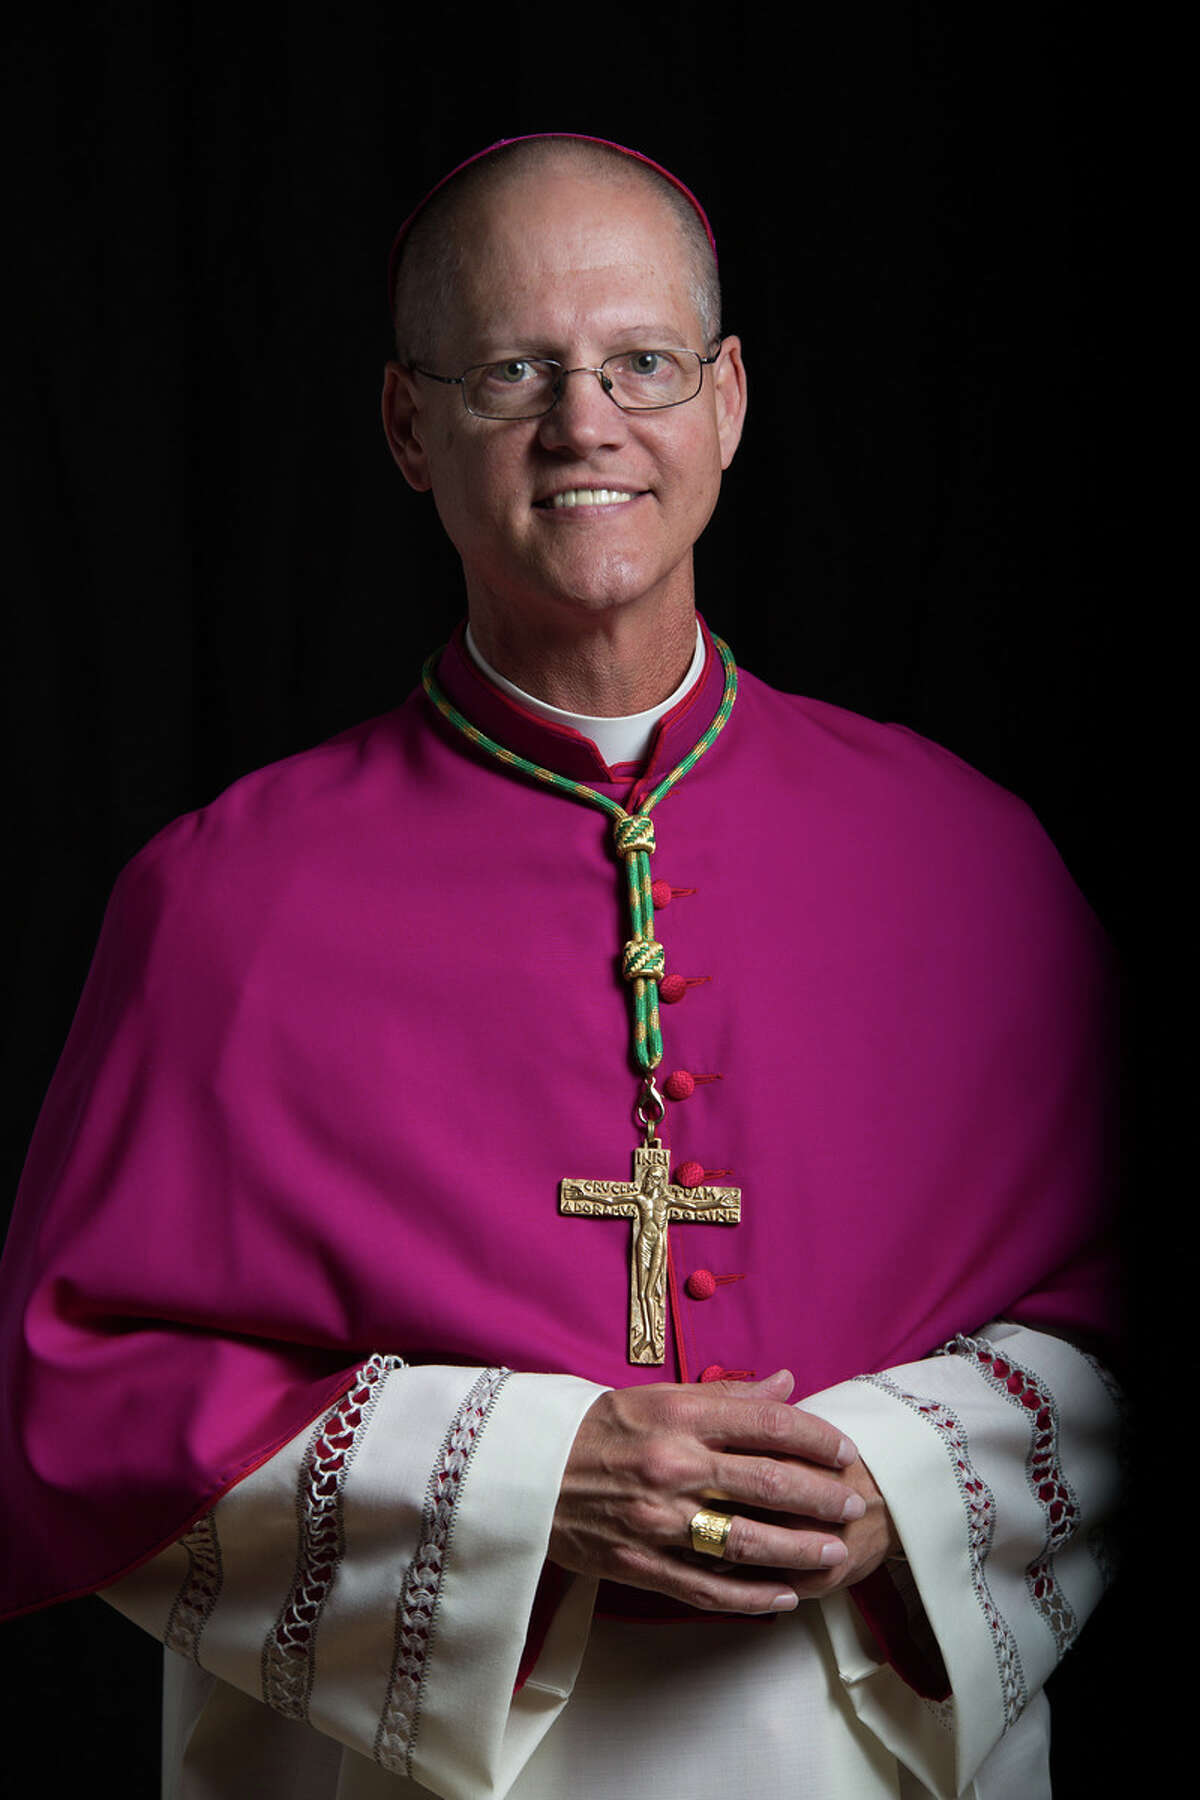 Anchorage Archbishop Paul Etienne, 59, is not happy about it, but will meet with Heal Our Church group of lay Catholics, who want a commission to study past sexual abuse by clergy and its coverup. 